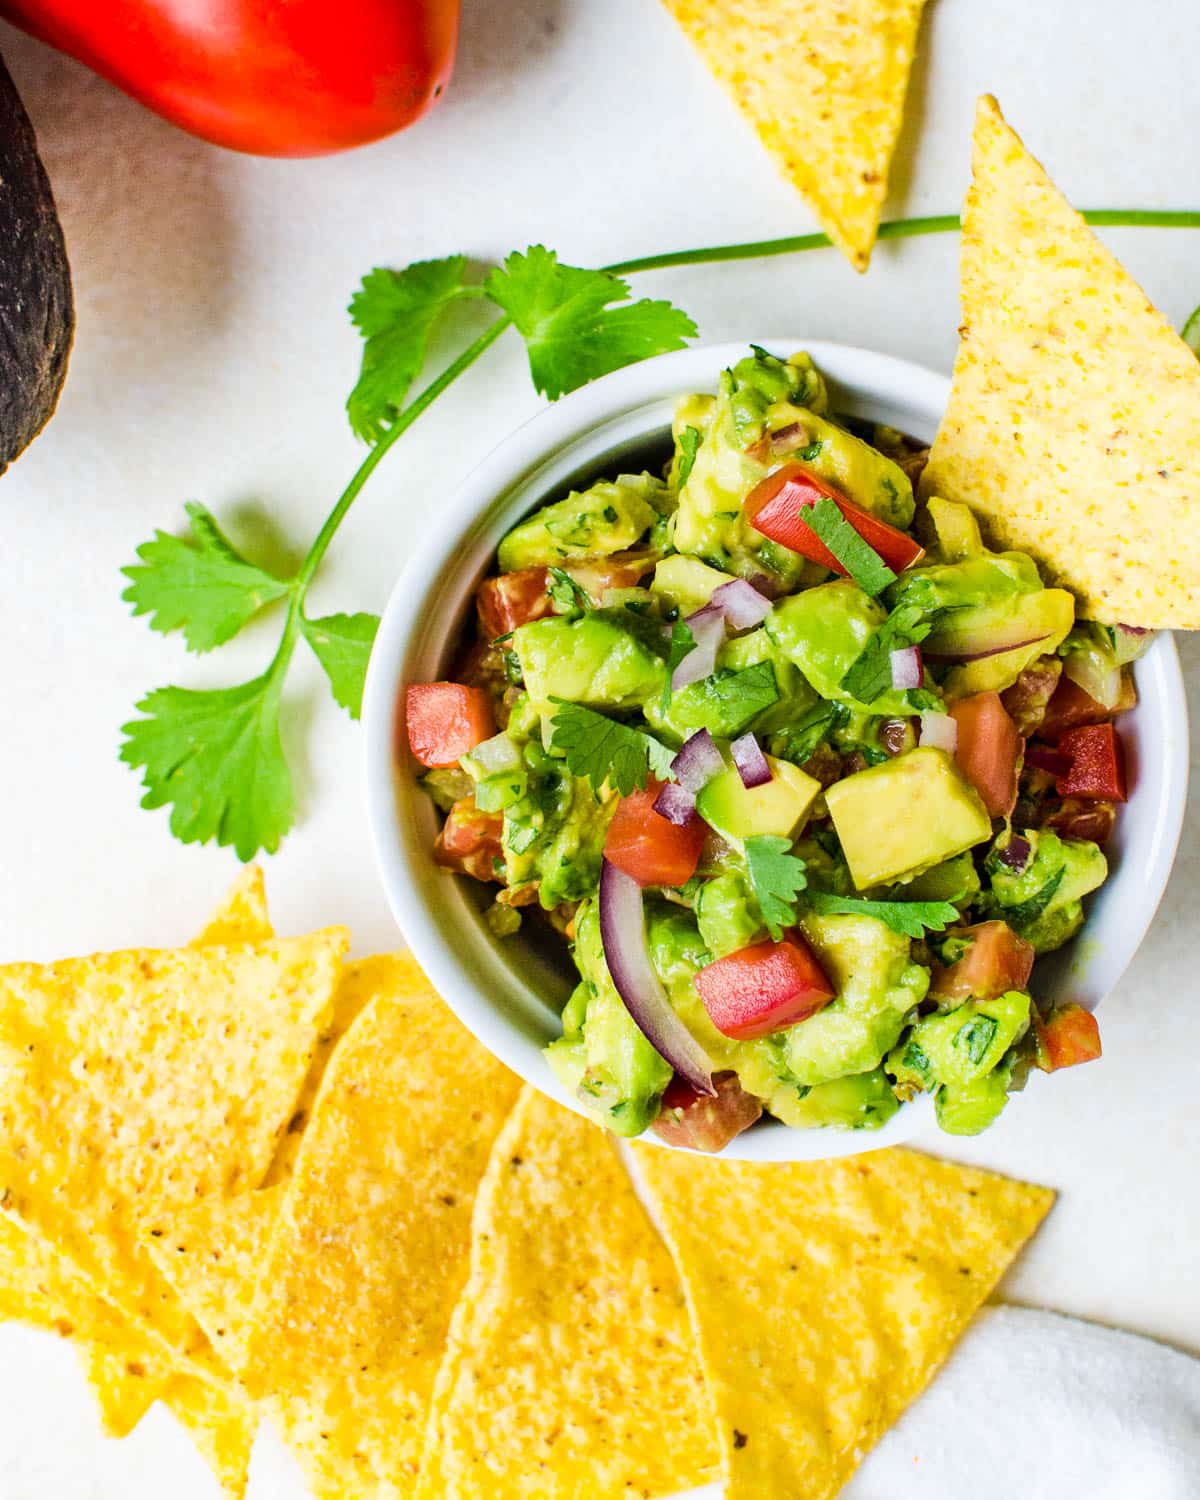 A dish of guacamole with crunchy tortilla chips.